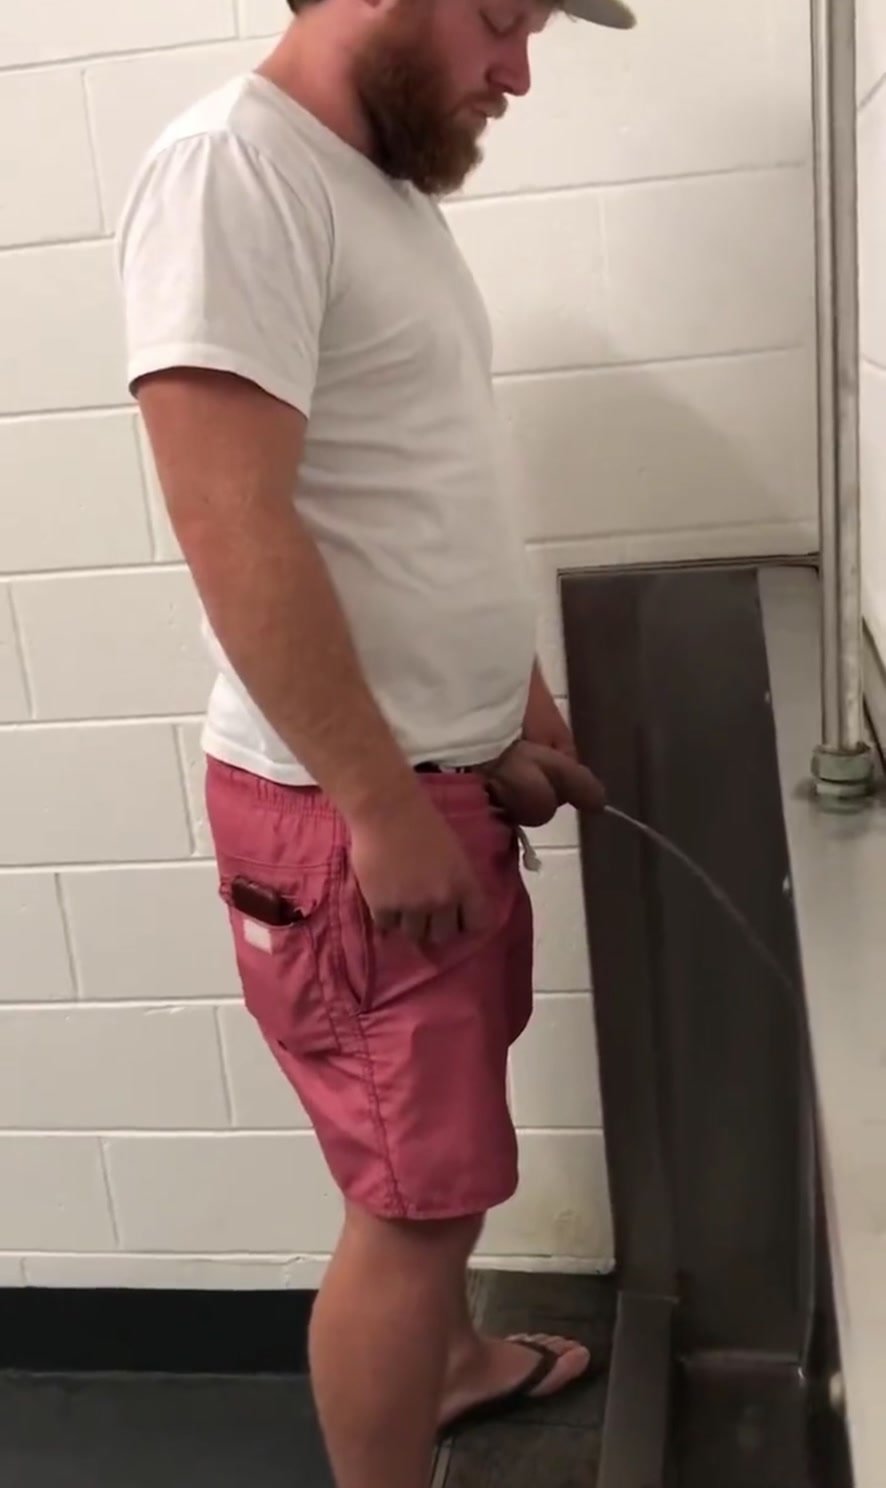 Two guys spy at urinal